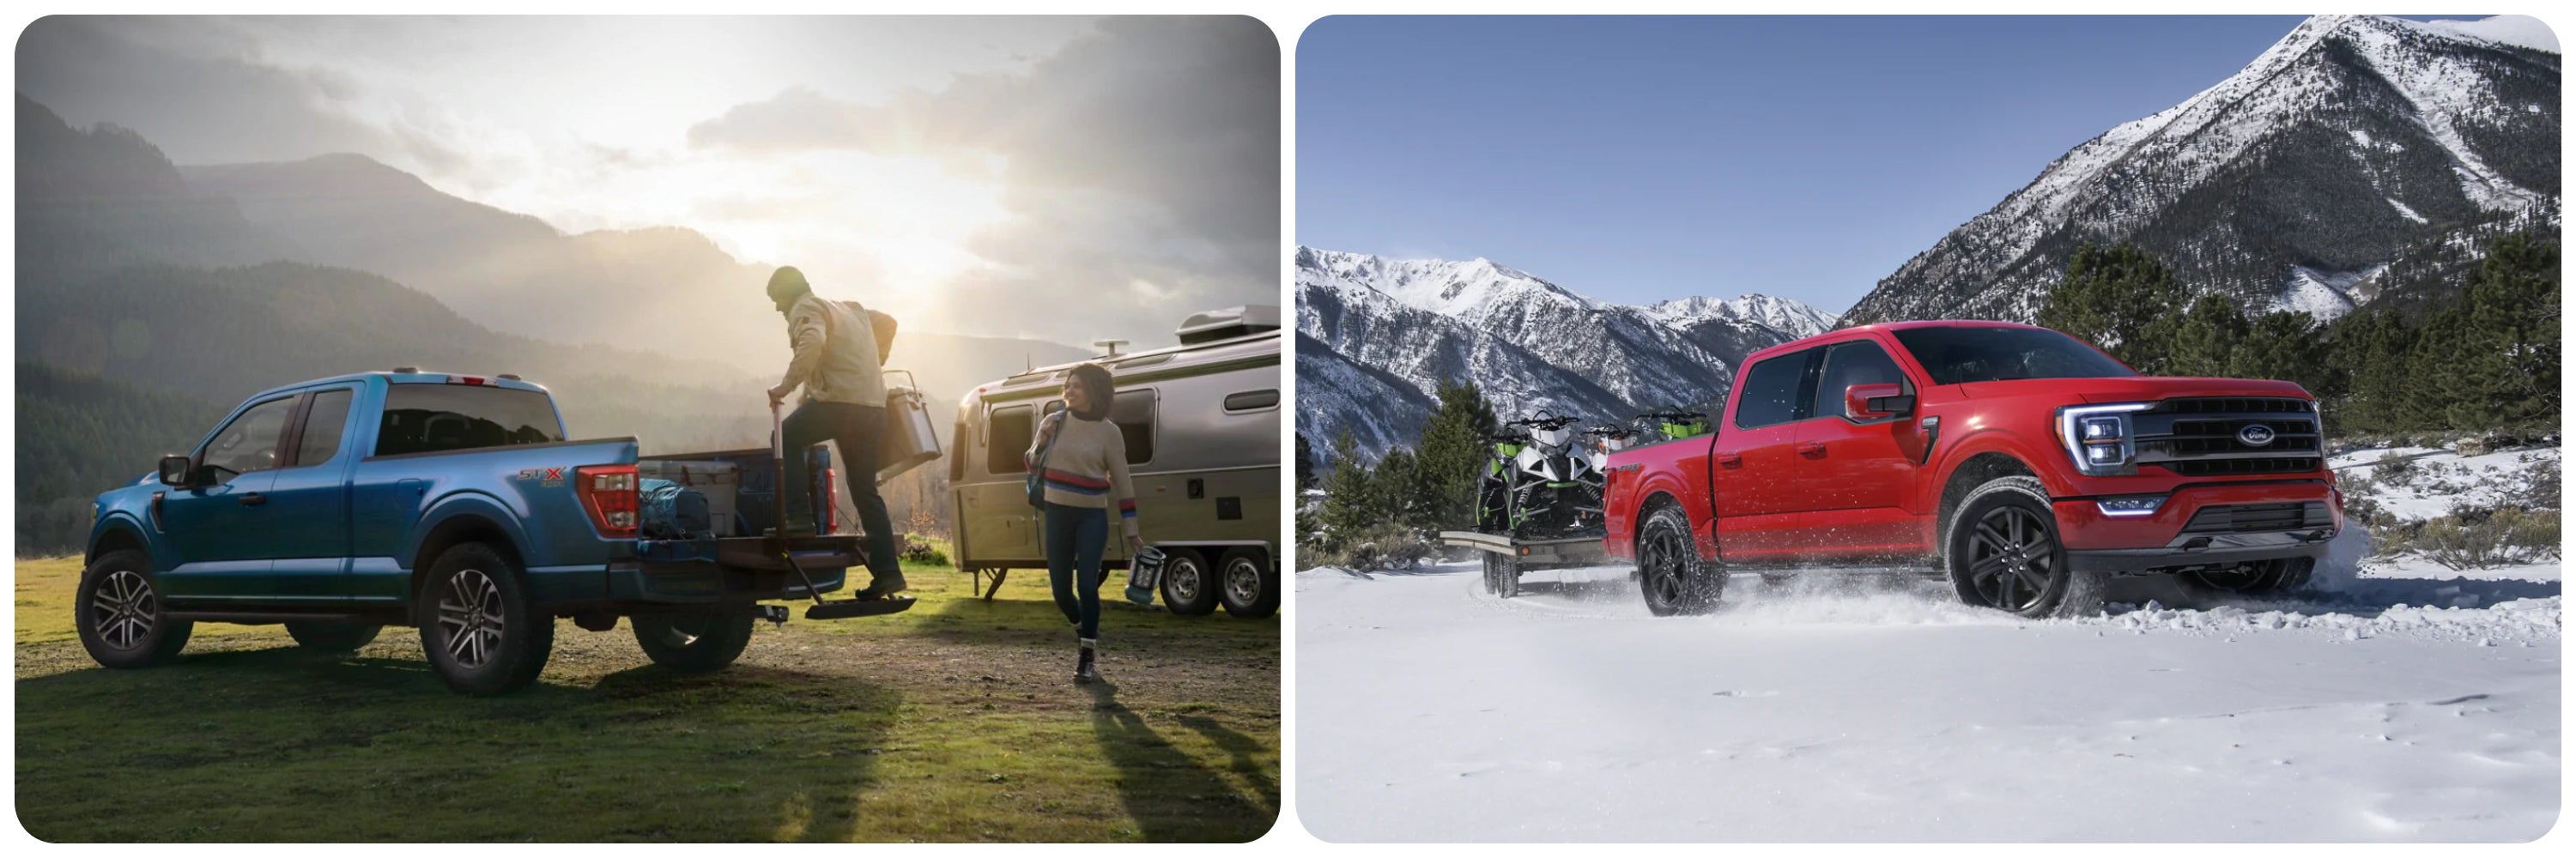 On the left a man steps into the bed of a blue 2022 Ford F150, loading camping gear with an airstream in the background and a woman walking up. On the right, a red 2021 Ford F150 hauls a pair of snowmobiles across a snowy field in the mountains.